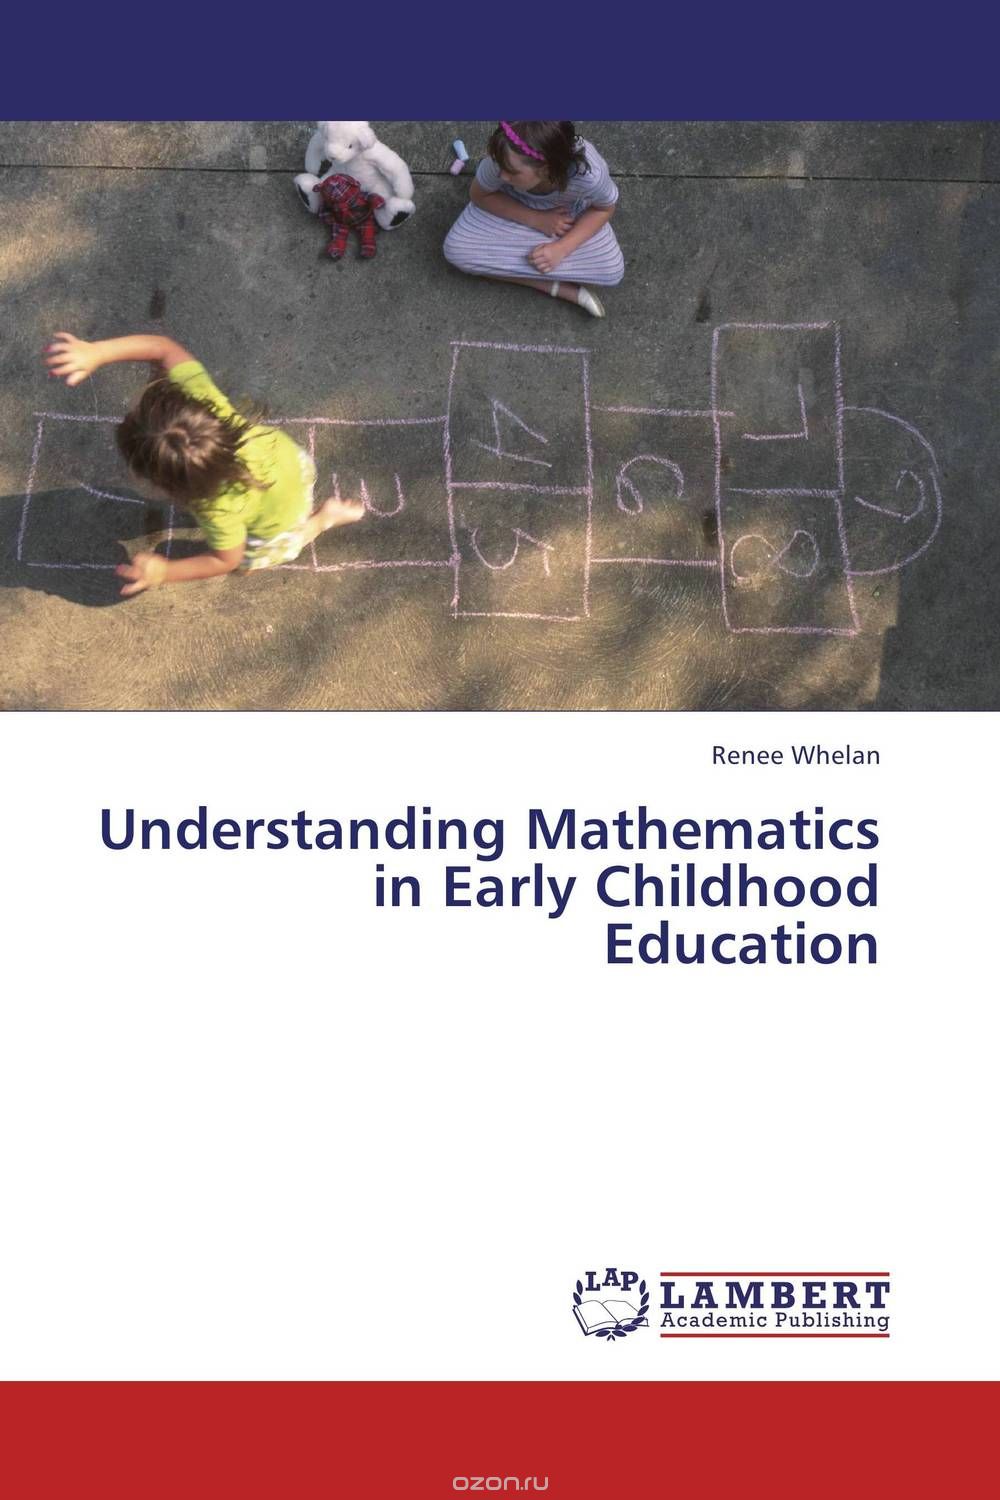 Understanding Mathematics in Early Childhood Education